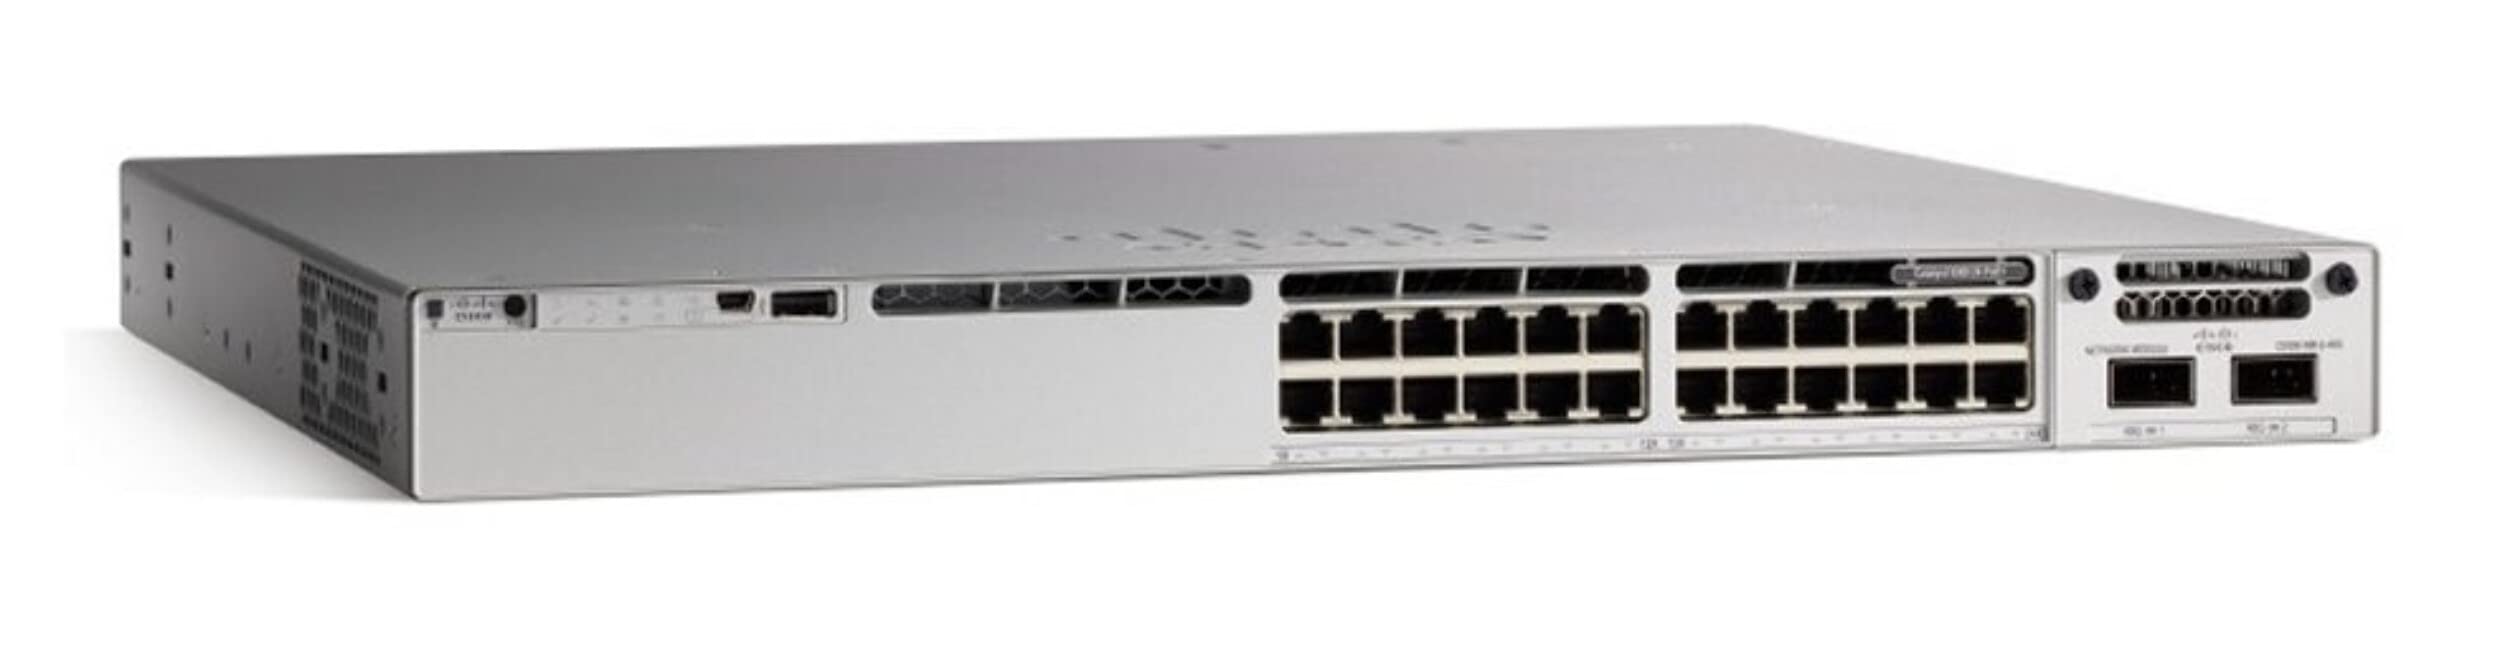 CATALYST 9300 24-PORT MGIG AND